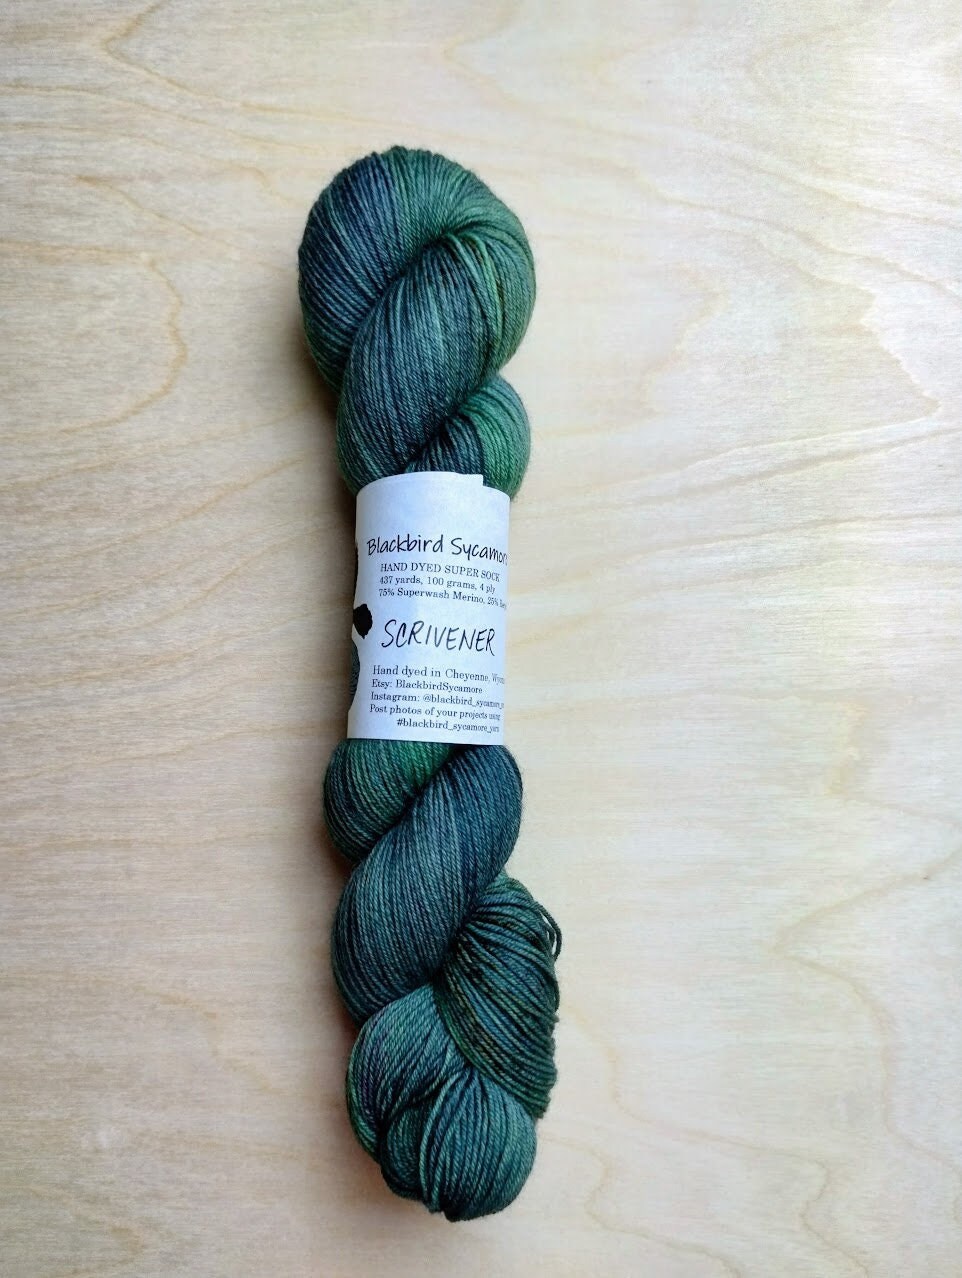 Vintage Poly Soft Worsted Weight Olefin 4 Ply Yarn - 1 Skein Forest Green  #51